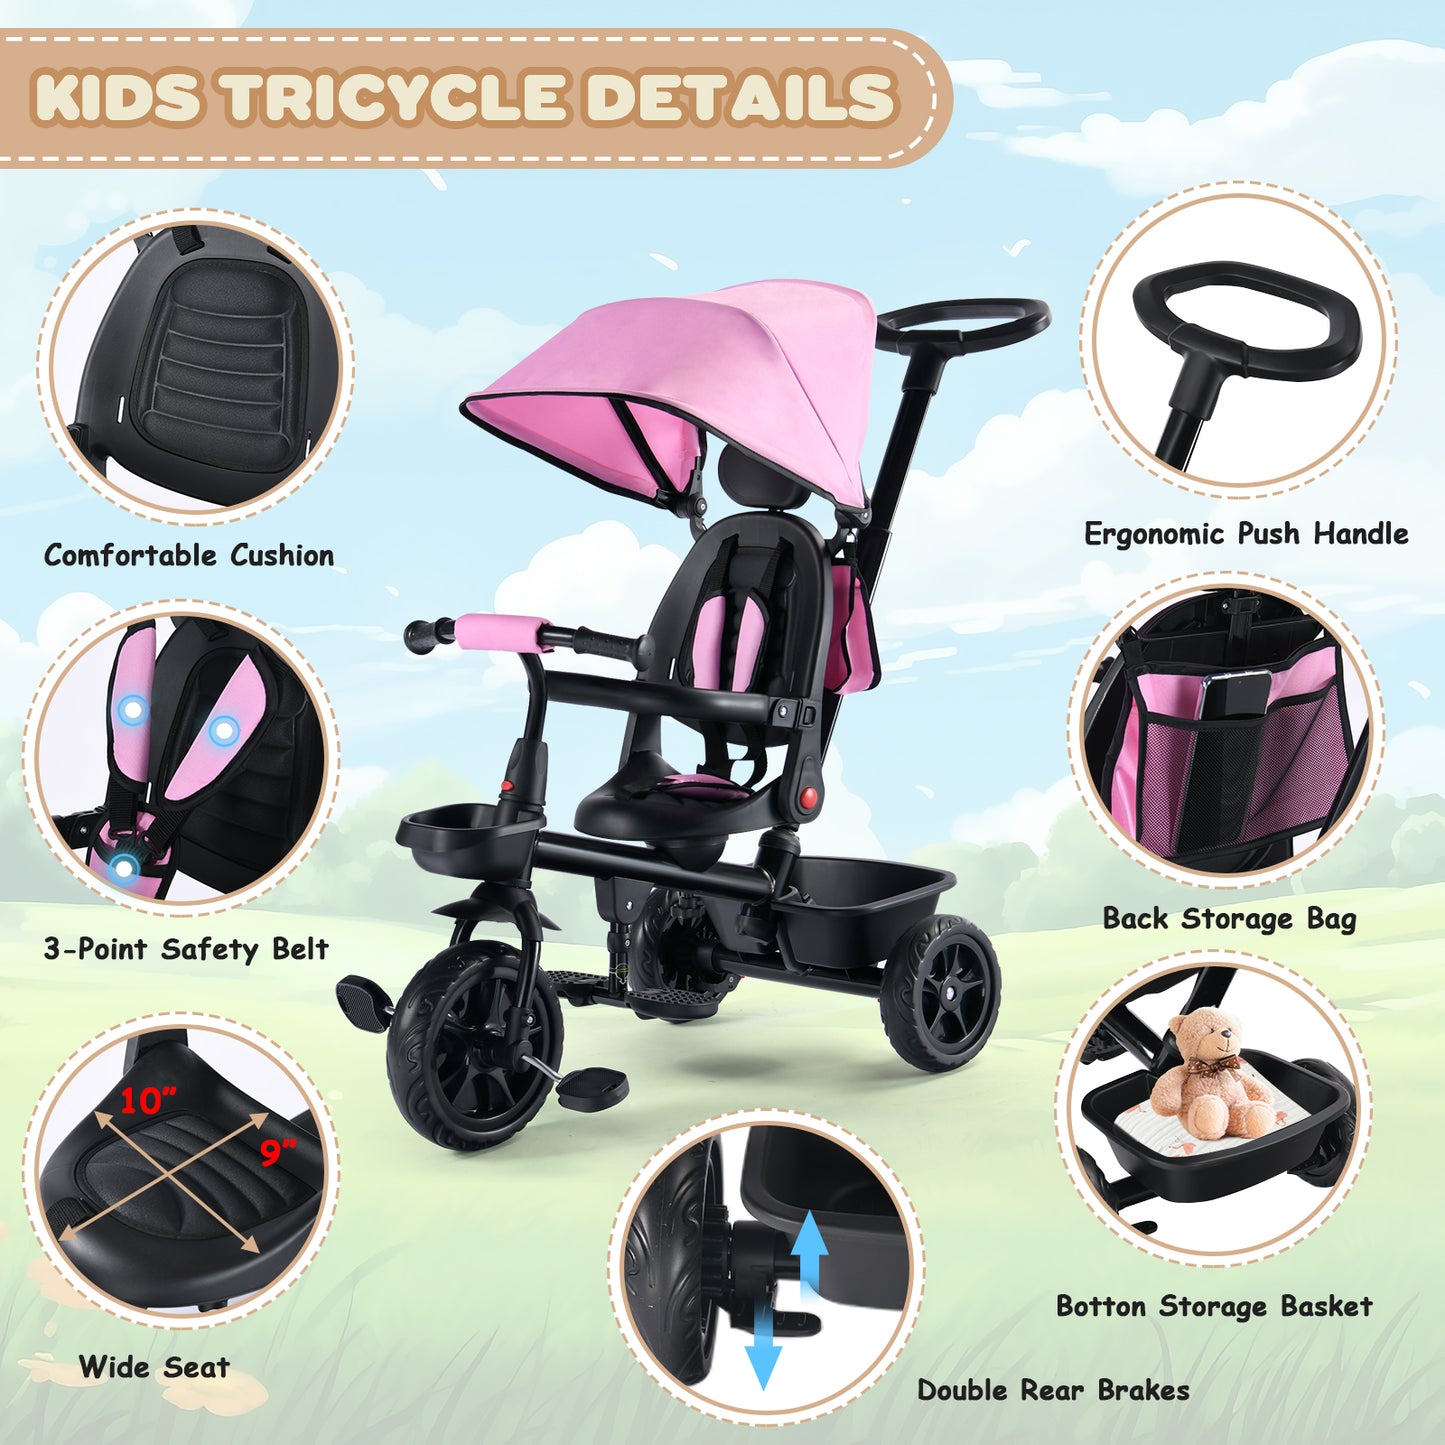 Kids' Tricycle, 6 IN 1 Baby Trike with Removable Canpoy& Push Handle, Toddler Bike for Kids 12-60 Months, Pink